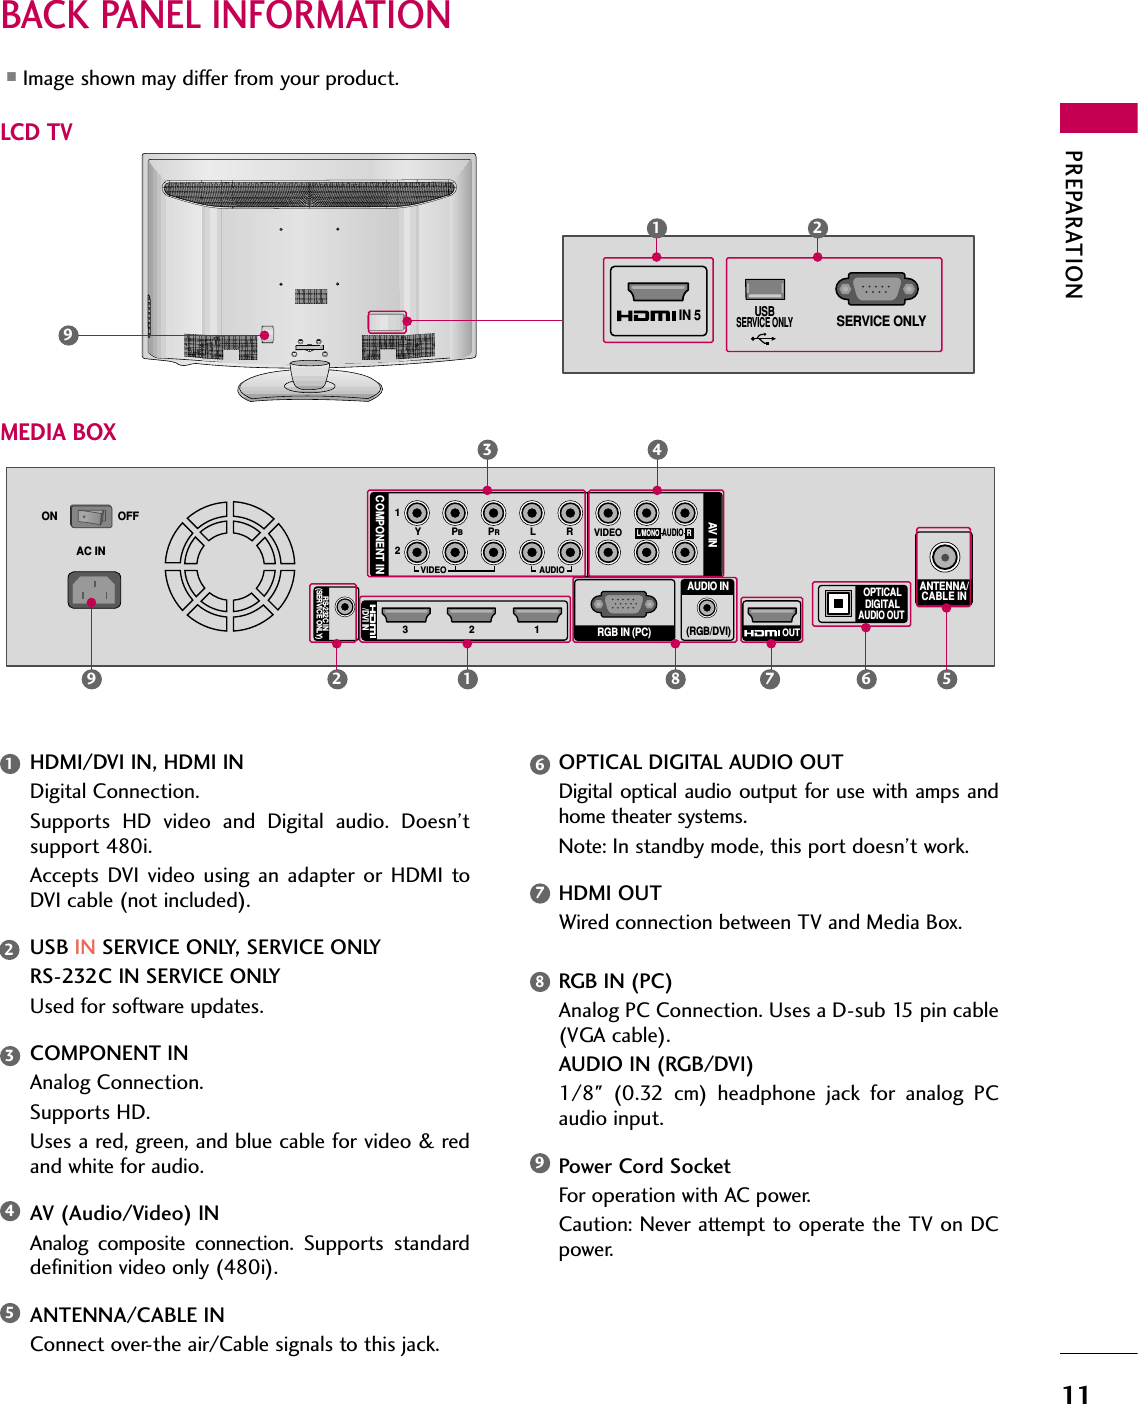 PREPARATION11BACK PANEL INFORMATION■Image shown may differ from your product.12COMPONENT INAV INLYPBPRRVIDEOAUDIOL/MONOR213/DVI INRGB IN (PC)AUDIO IN(RGB/DVI)OUTOPTICALDIGITALAUDIO OUT ANTENNA/CABLE INRS-232C IN(SERVICE ONLY)OFFONAC INVIDEOAUDIO41 8 6 5293LCD TVMEDIA BOX79HDMI/DVI IN, HDMI INDigital Connection. Supports HD video and Digital audio. Doesn’tsupport 480i. Accepts DVI video using an adapter or HDMI toDVI cable (not included).USB IN SERVICE ONLY, SERVICE ONLYRS-232C IN SERVICE ONLYUsed for software updates.COMPONENT INAnalog Connection. Supports HD. Uses a red, green, and blue cable for video &amp; redand white for audio.AV (Audio/Video) INAnalog composite connection. Supports standarddefinition video only (480i).ANTENNA/CABLE INConnect over-the air/Cable signals to this jack.OPTICAL DIGITAL AUDIO OUTDigital optical audio output for use with amps andhome theater systems. Note: In standby mode, this port doesn’t work.HDMI OUTWired connection between TV and Media Box.RGB IN (PC)Analog PC Connection. Uses a D-sub 15 pin cable(VGA cable).AUDIO IN (RGB/DVI)1/8&quot; (0.32 cm) headphone jack for analog PCaudio input.Power Cord SocketFor operation with AC power. Caution: Never attempt to operate the TV on DCpower.123459876USBSERVICE ONLYSERVICE ONLYIN 51 2